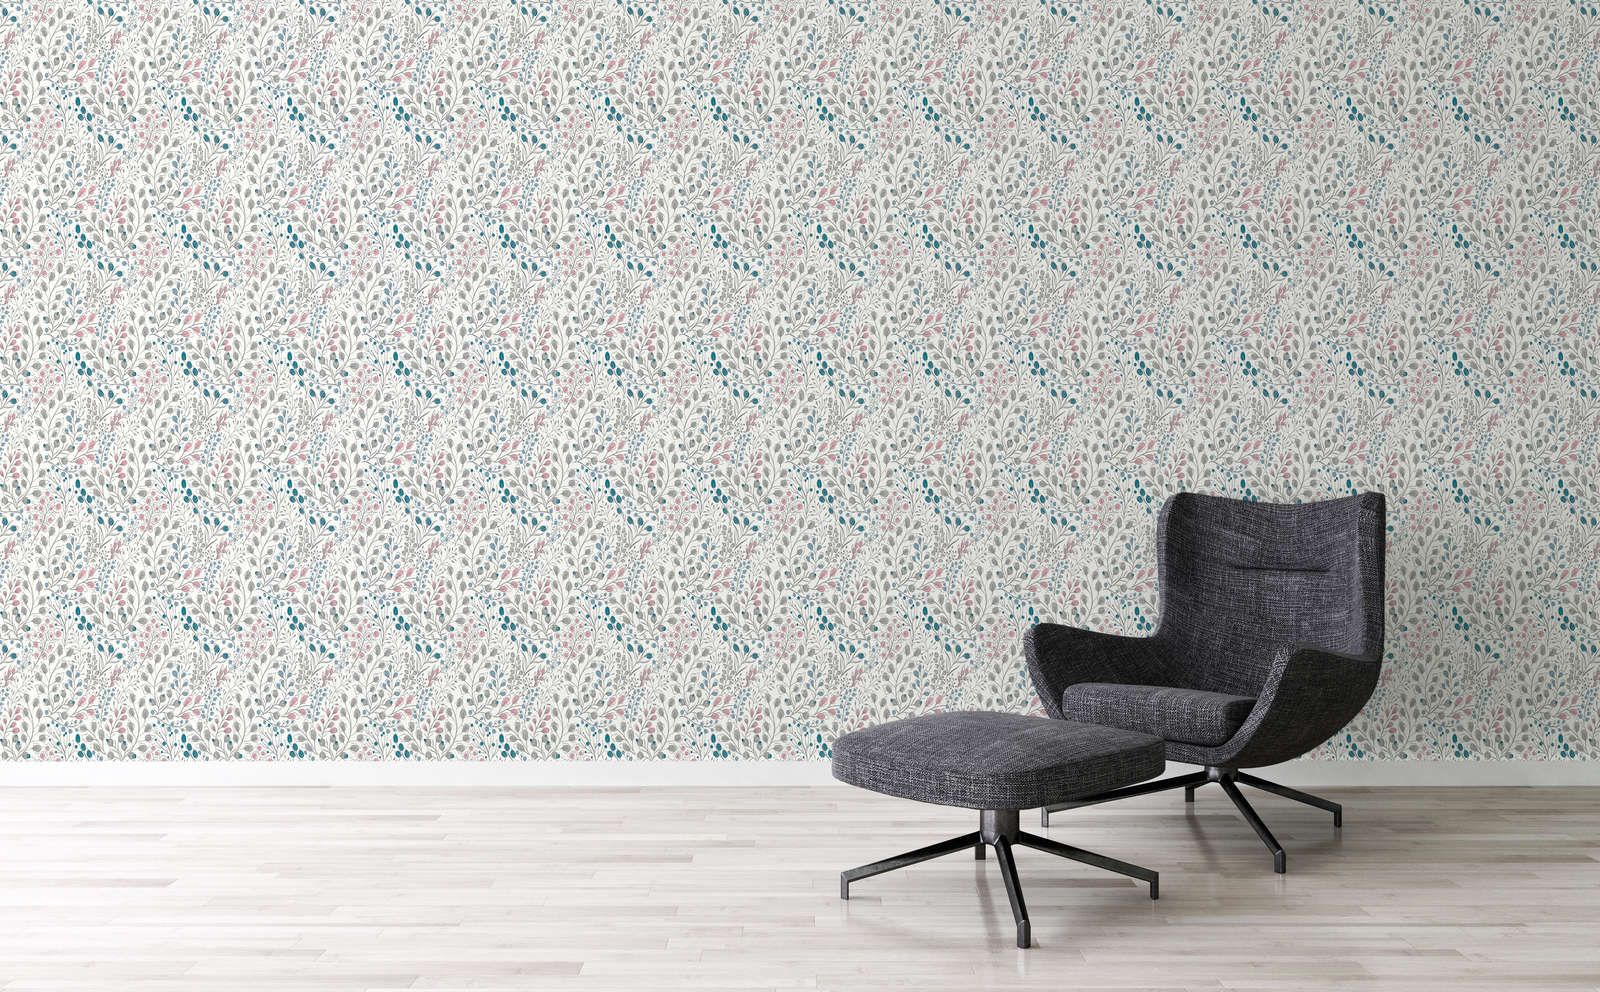             Non-woven wallpaper with floral pattern in drawing style - white, pink, blue
        